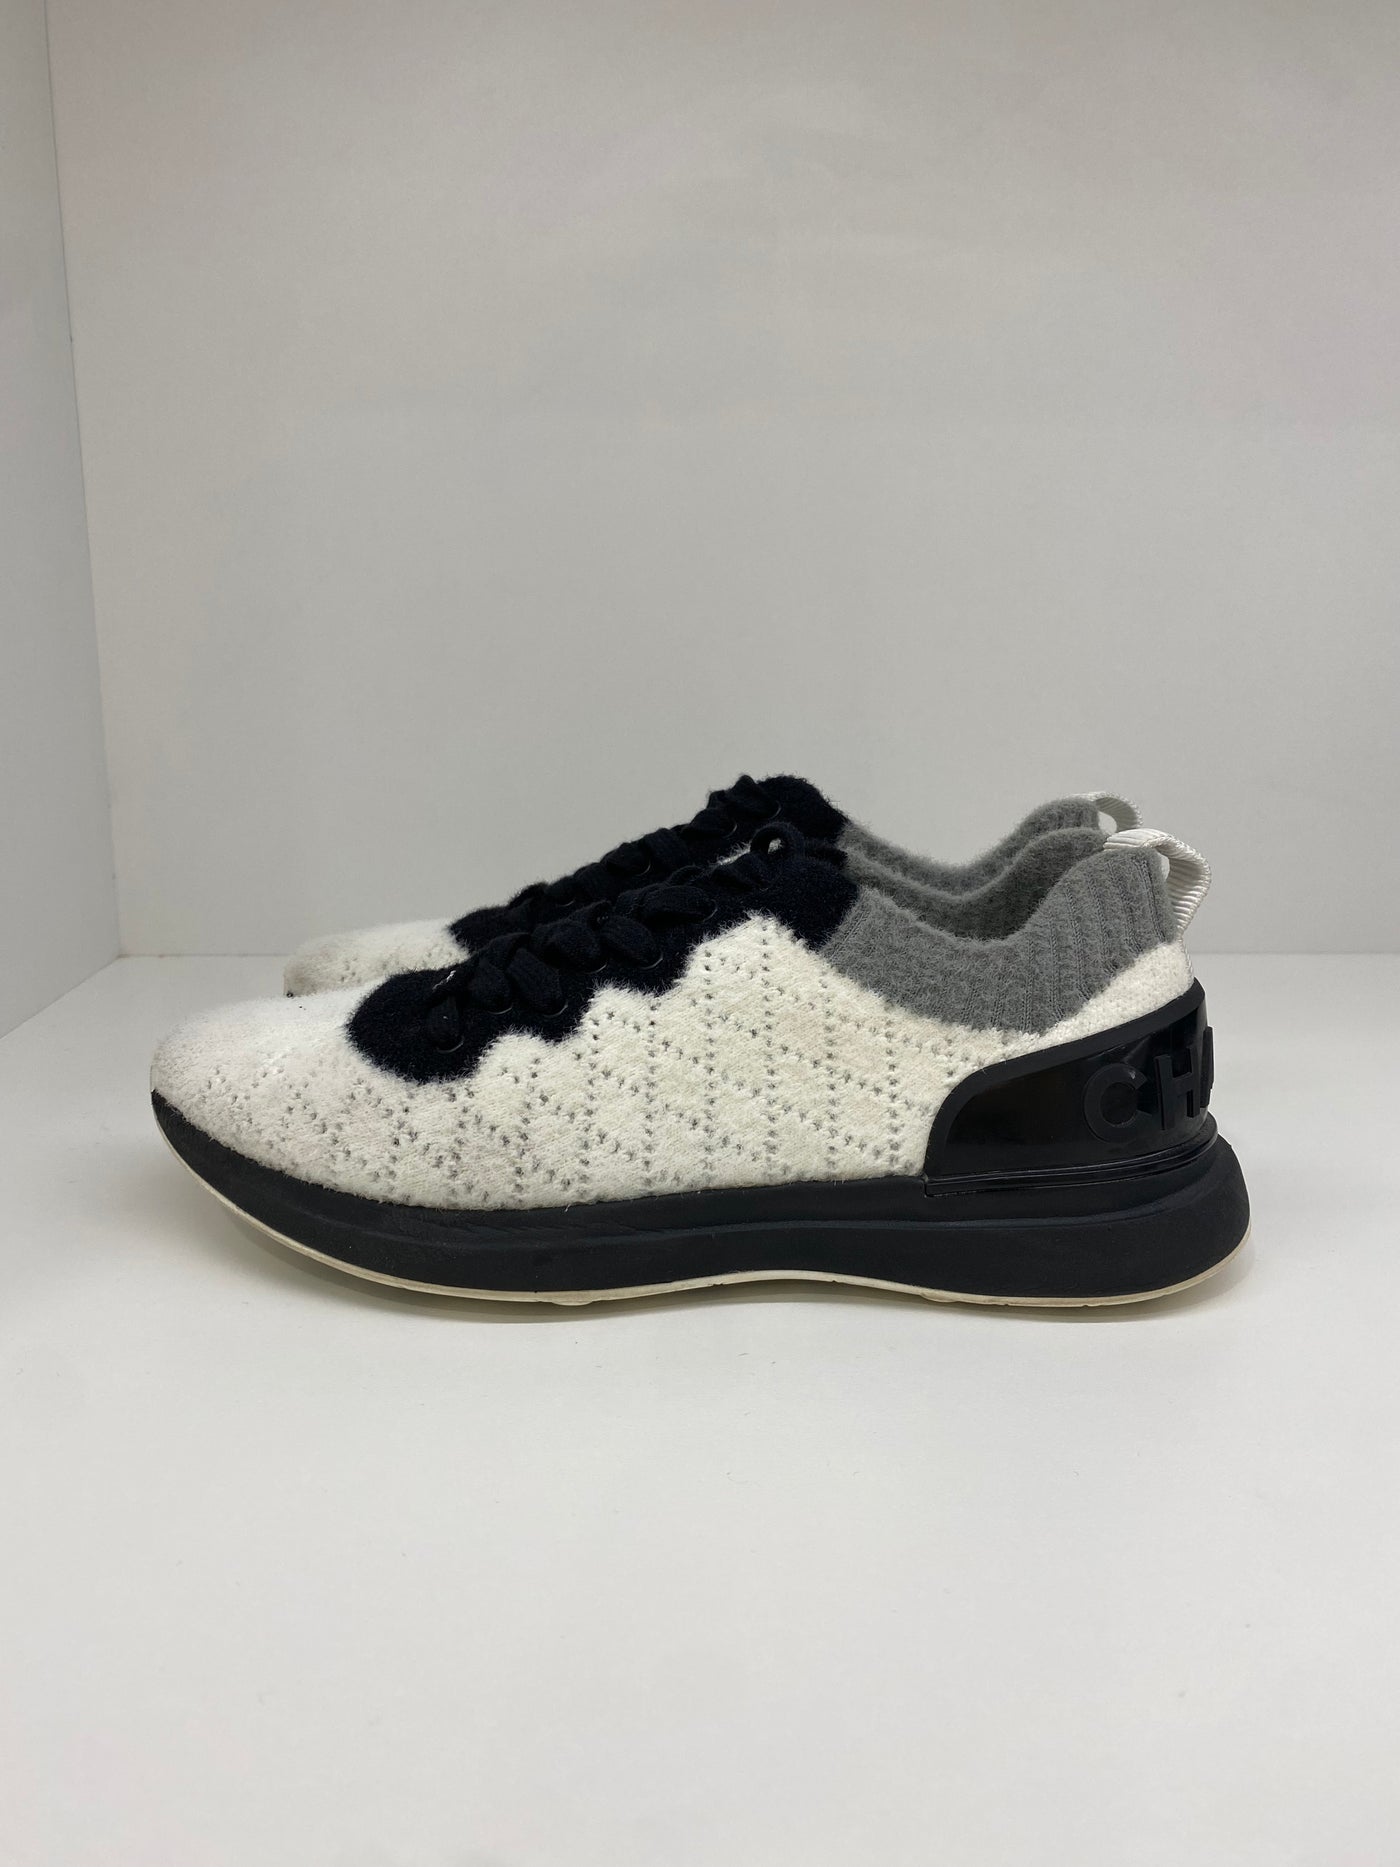 Chanel knit sneakers Size 39 - SOLD